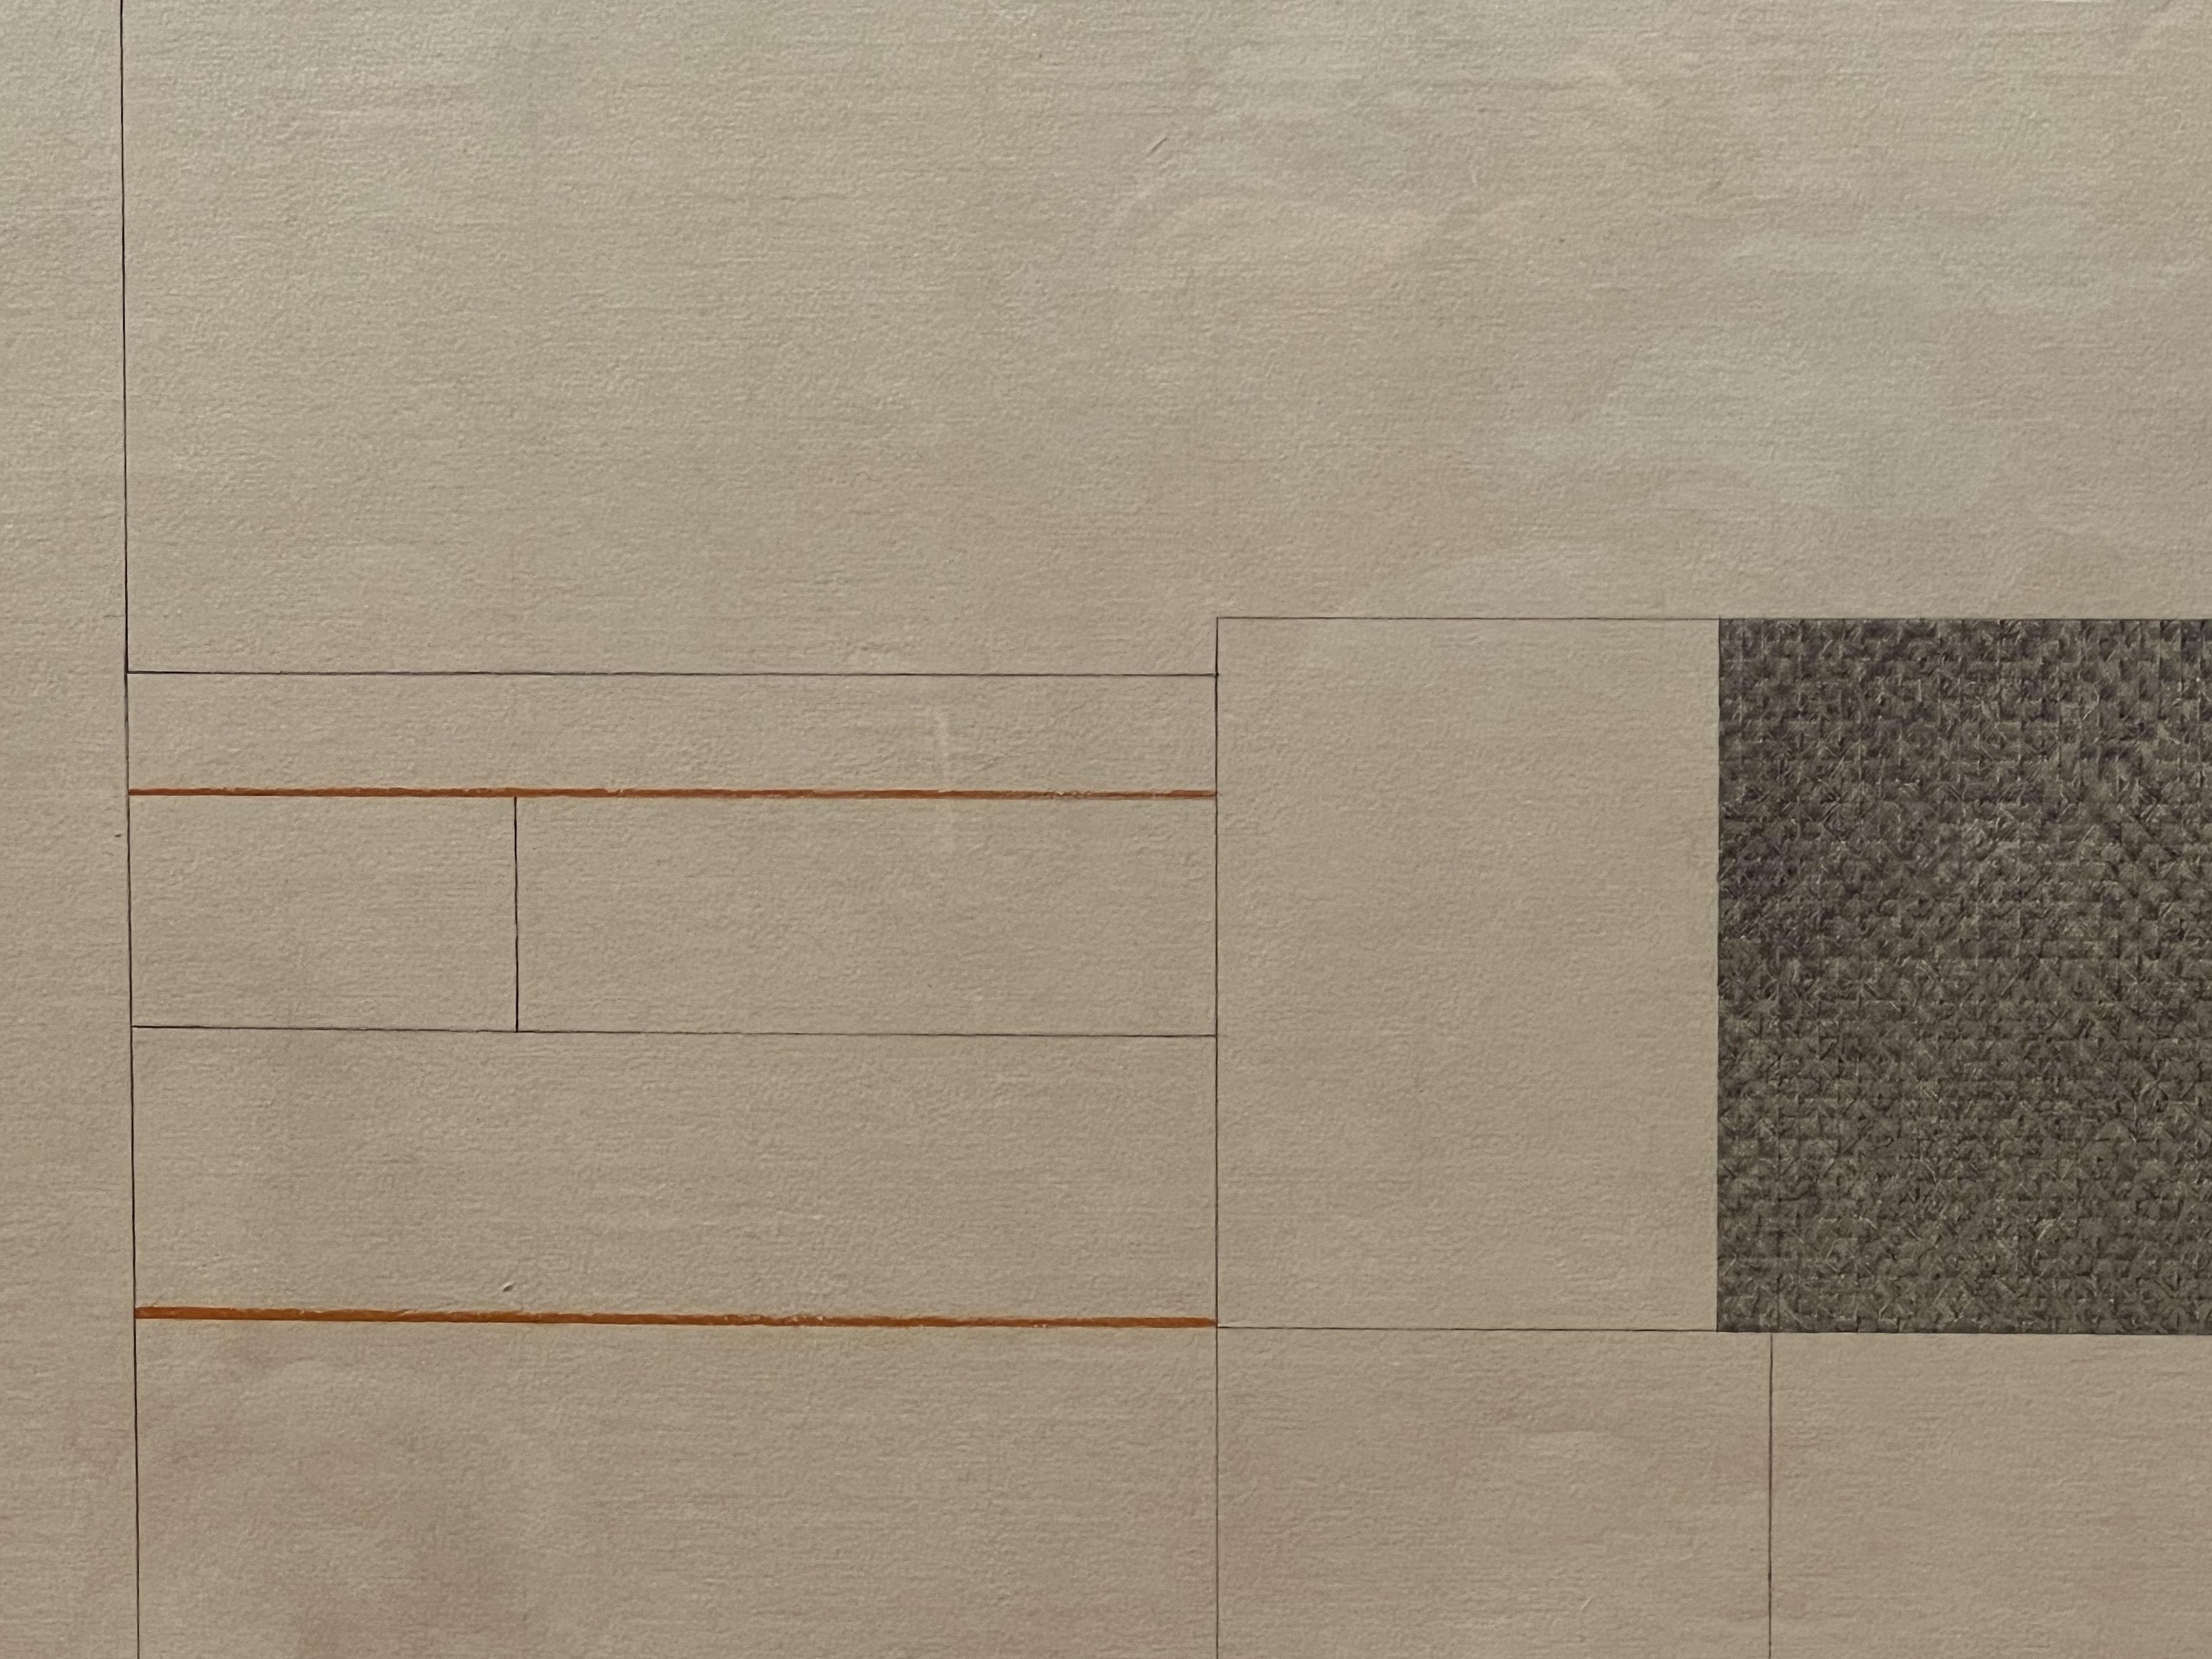 Abstract Minimalist Beige and Grey Block and Lines Drawing For Sale 1